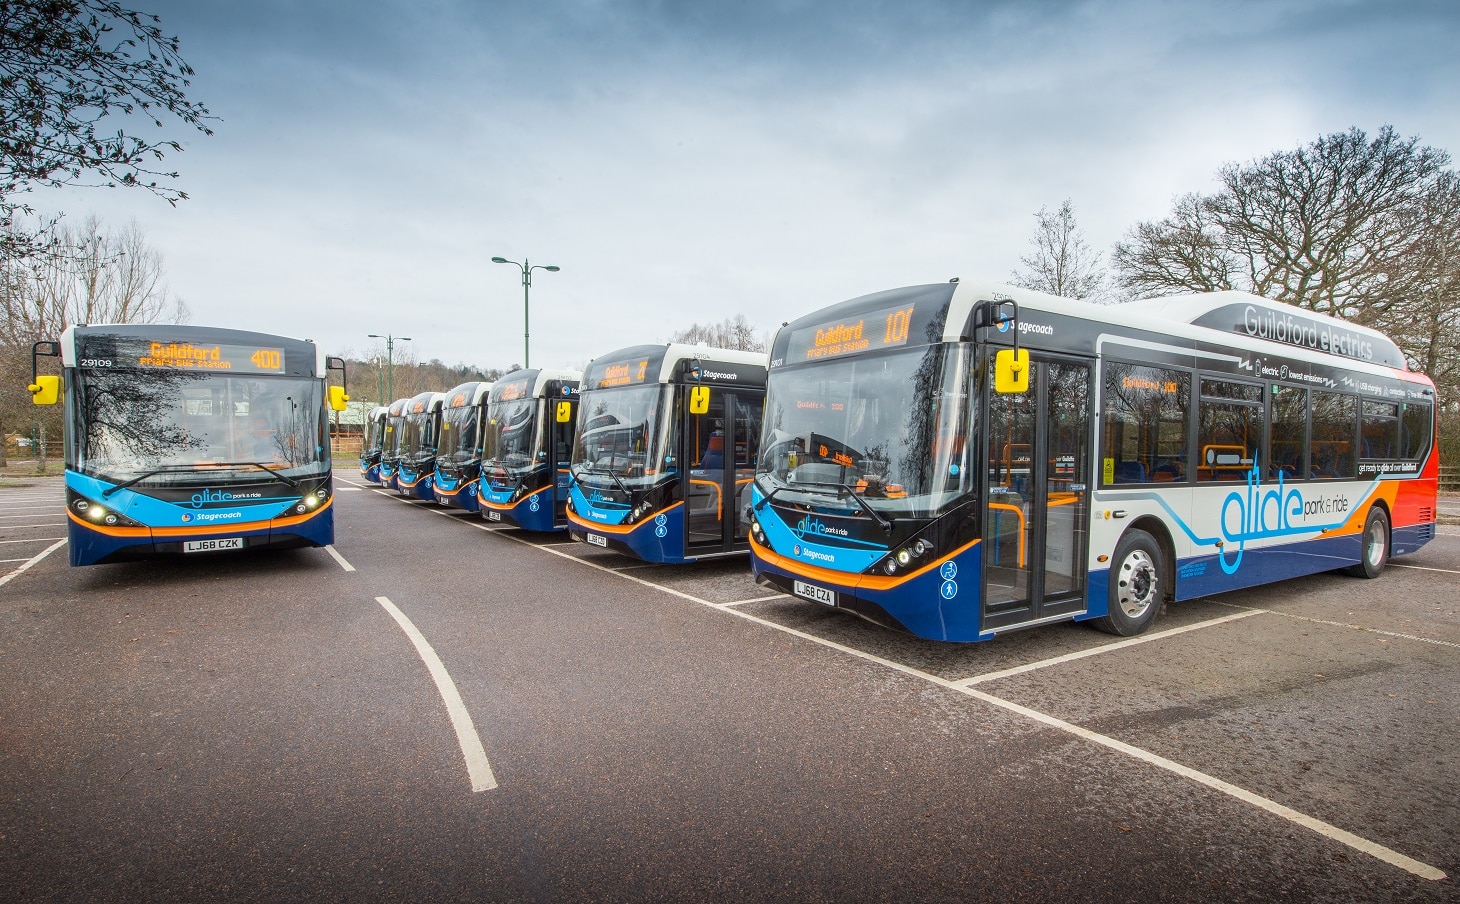 £120m ZEBRA buses scheme launched in England